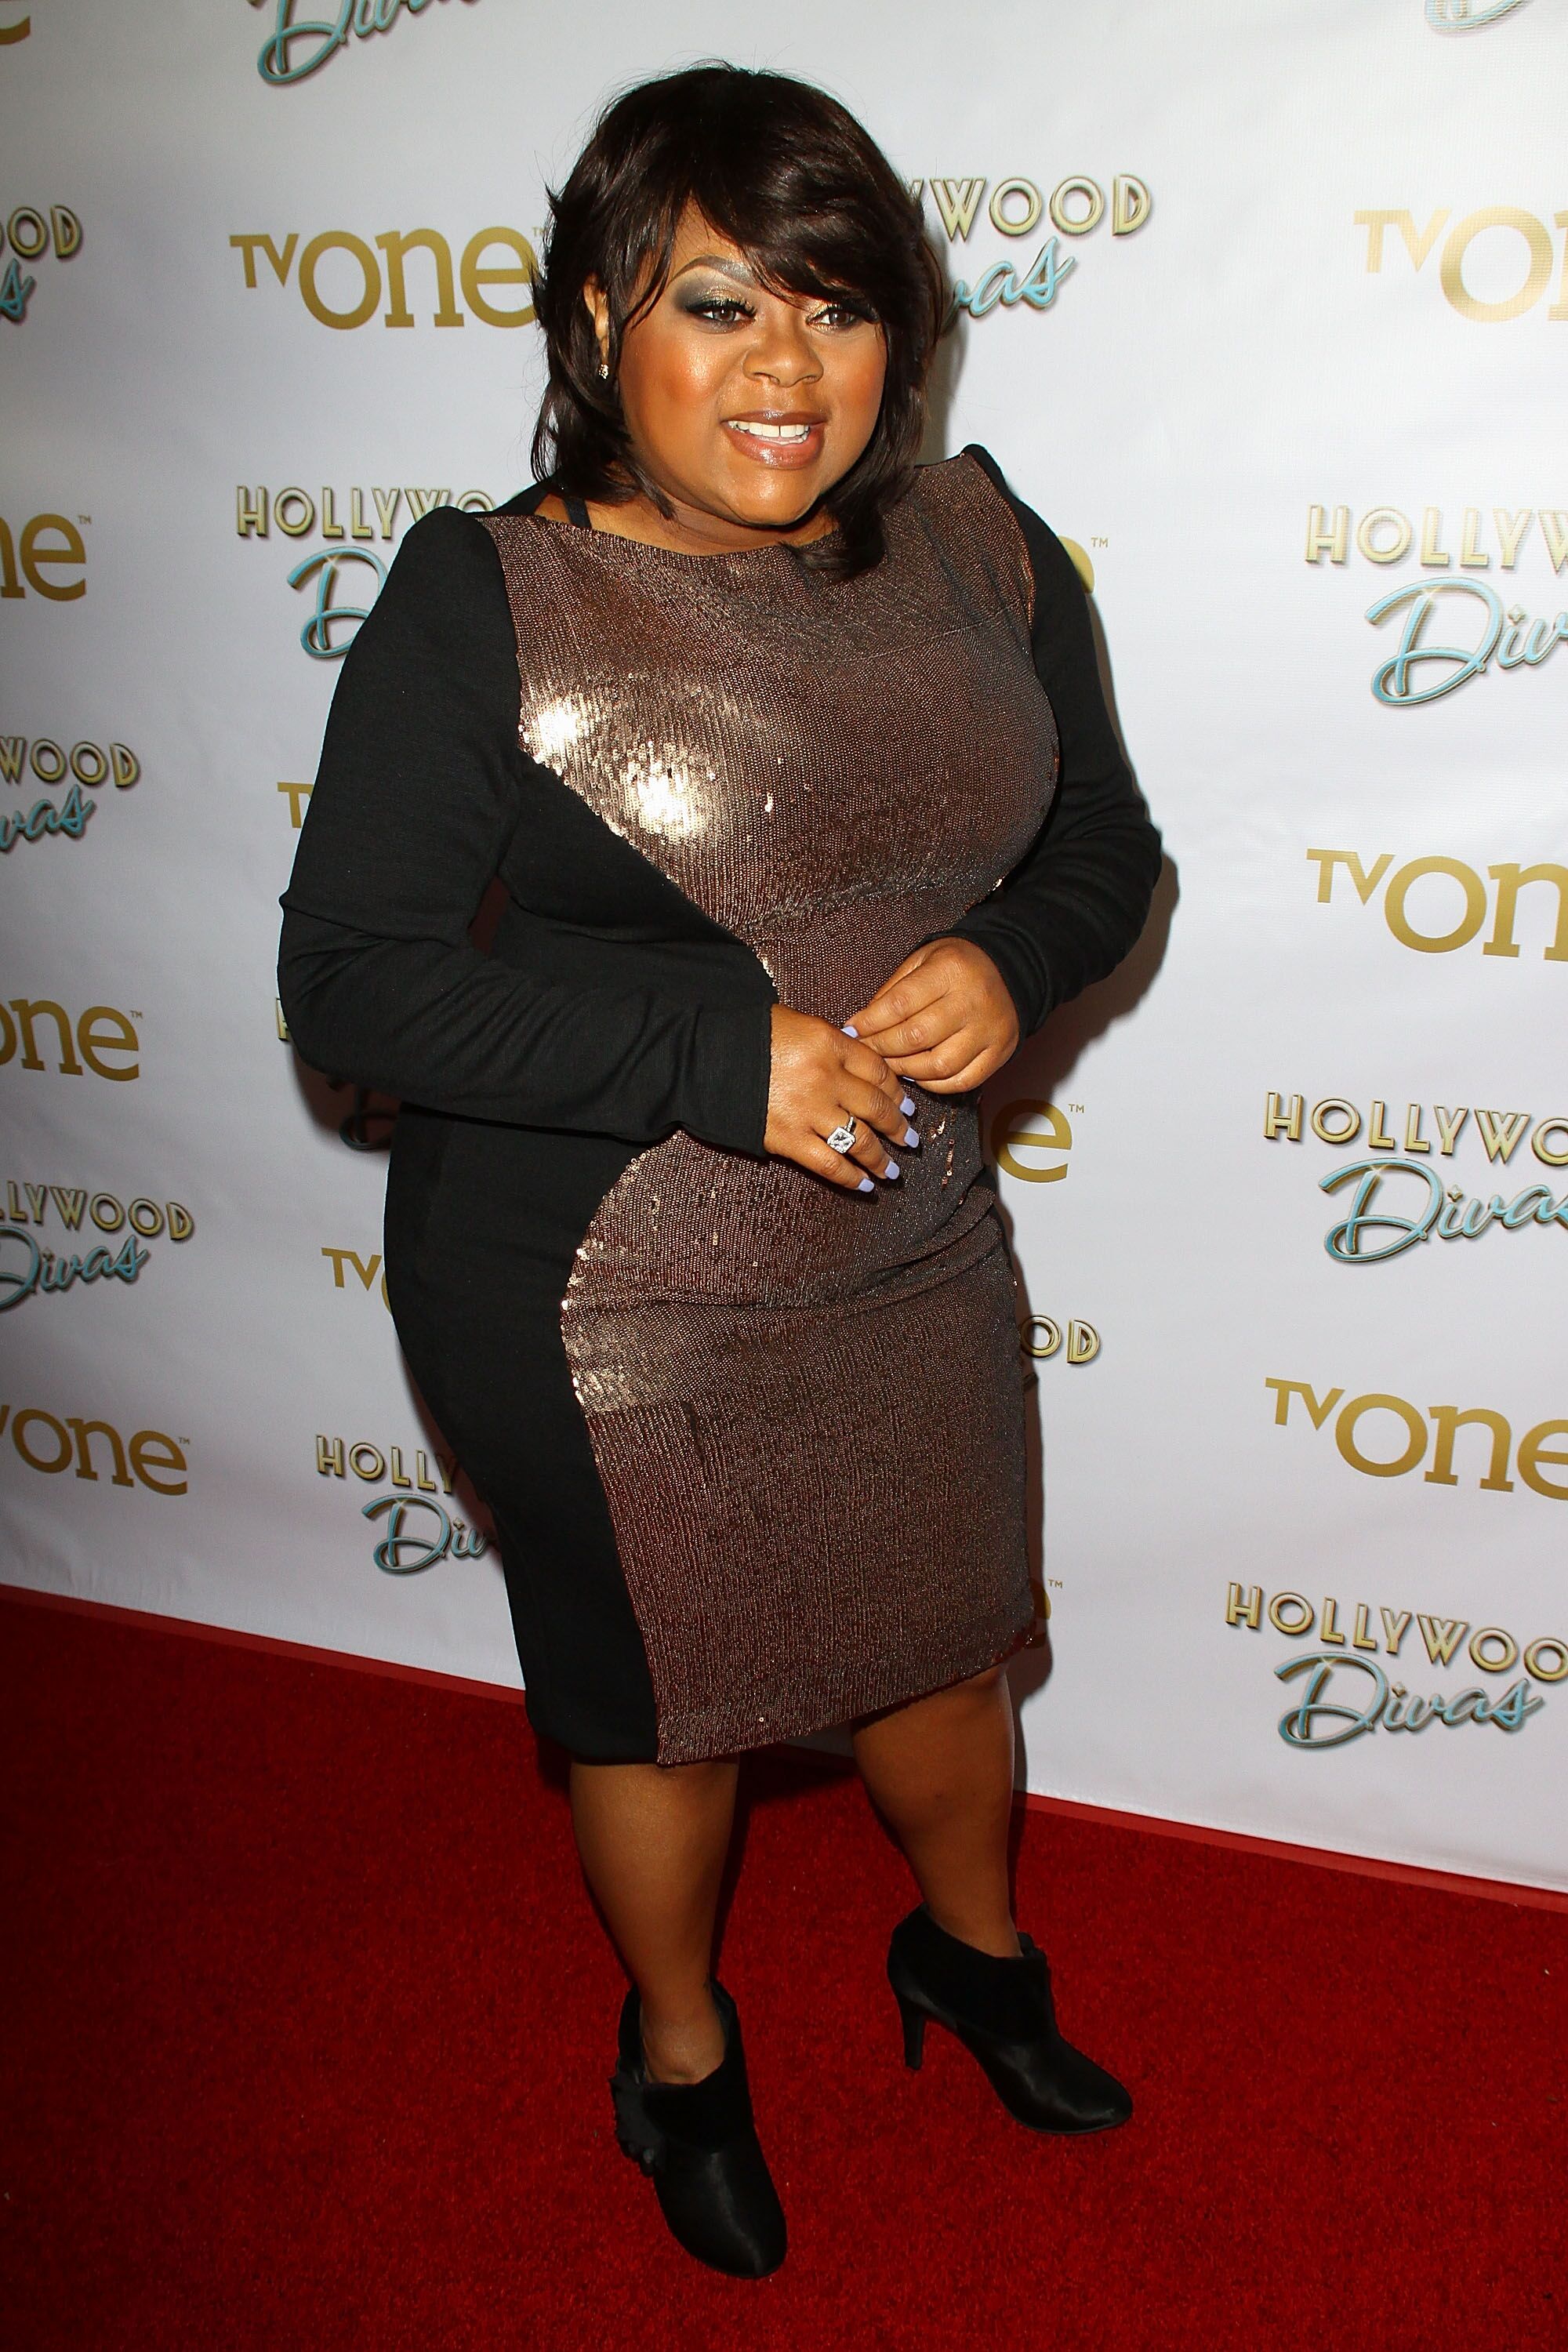 Countess Vaughn attends a TVOne event for "Hollywood Divas" | Photo: Getty Images